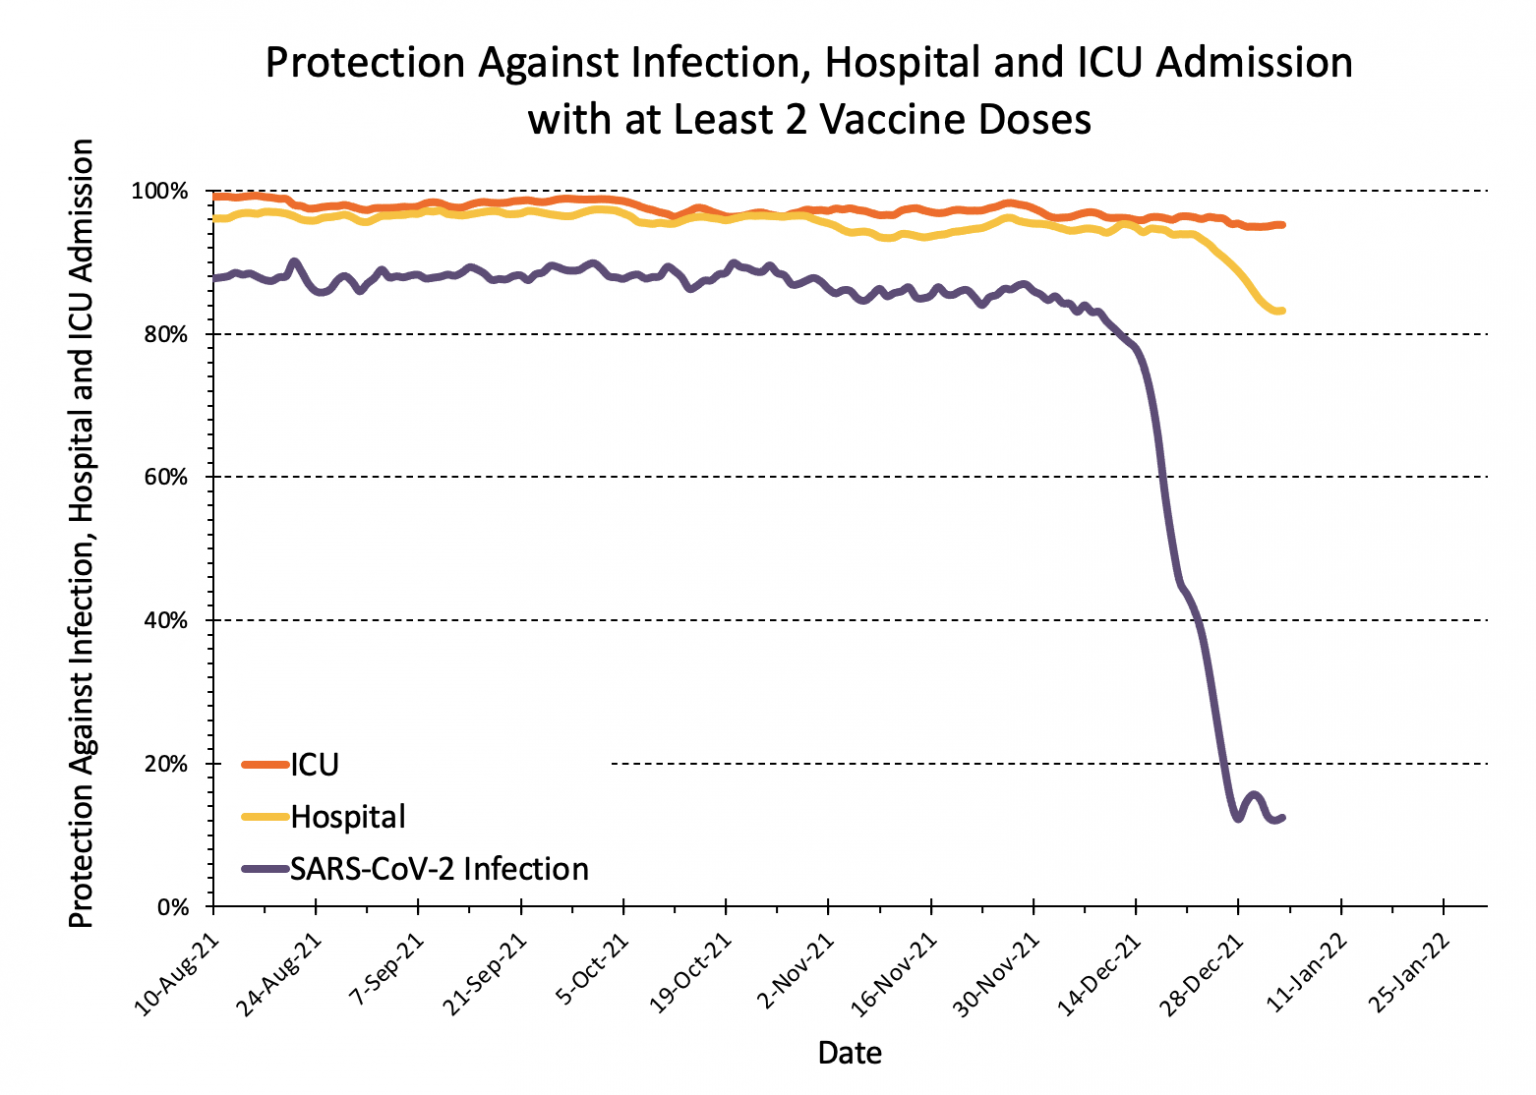 2022-01-03-Protection-Against-Infection-Hospital-and-ICU-Admission-with-2-Vaccine-Doses-1536x1095.png